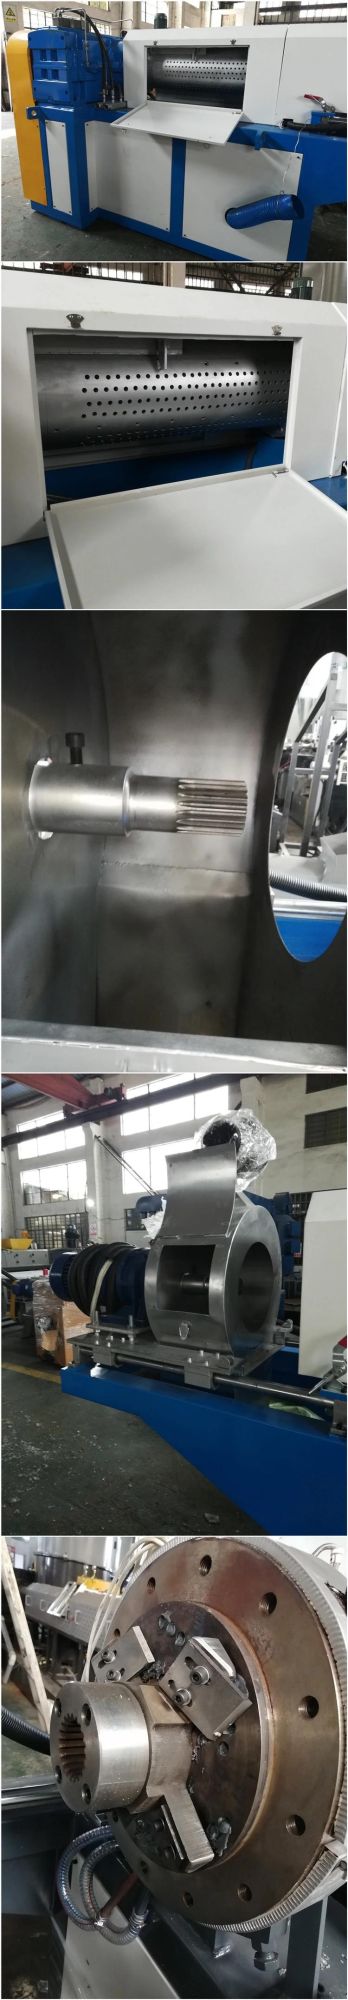 China Made Squeezer Dryer Recycling Machine Cleaning Device for Plastic Film